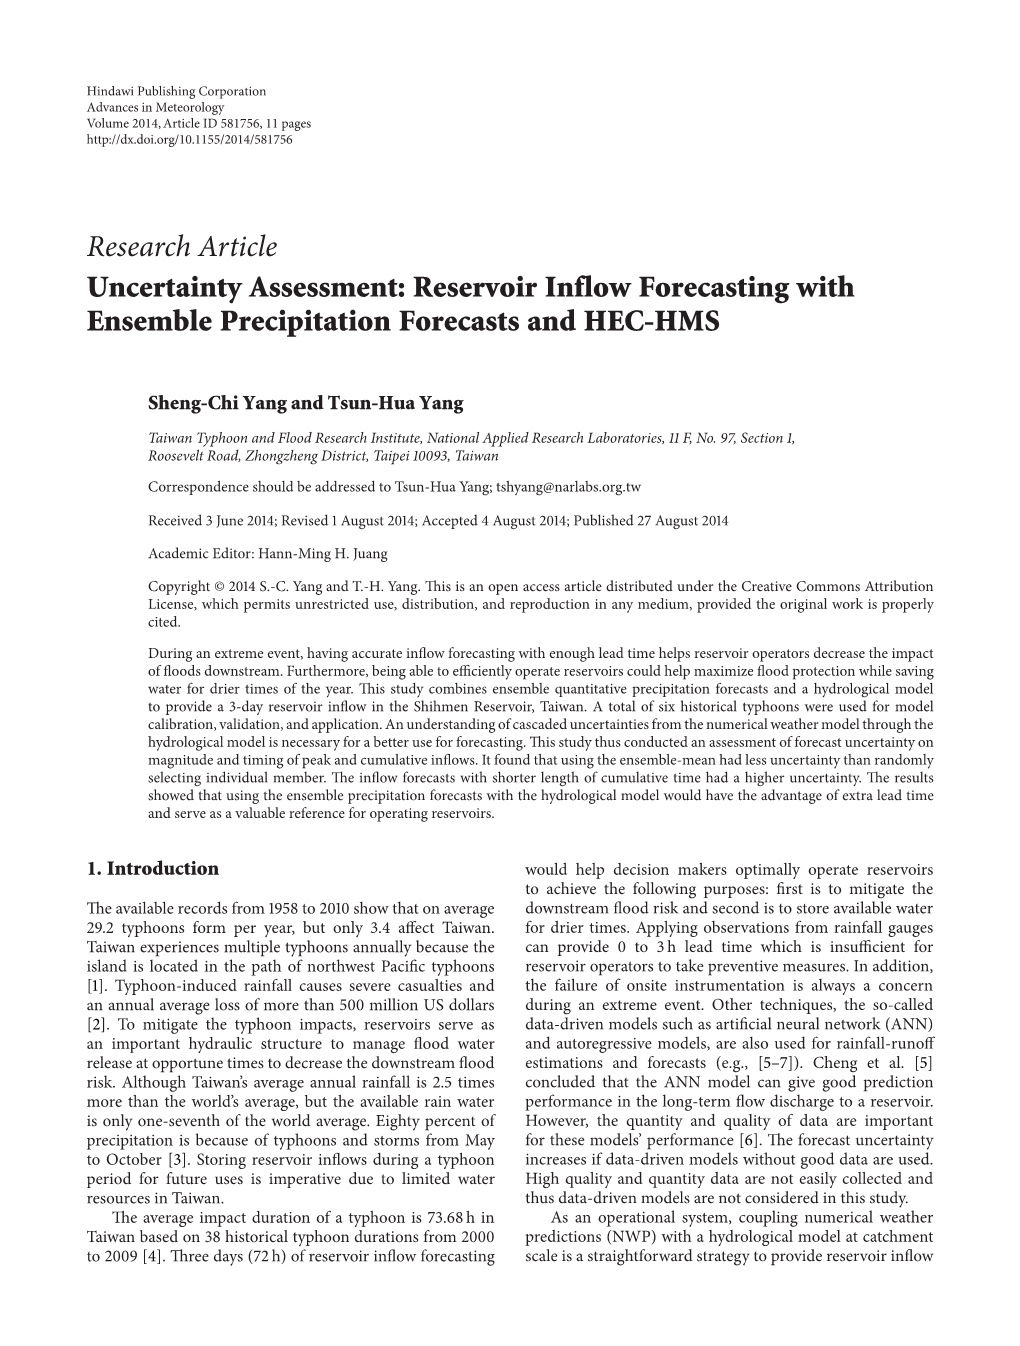 Uncertainty Assessment: Reservoir Inflow Forecasting with Ensemble Precipitation Forecasts and HEC-HMS